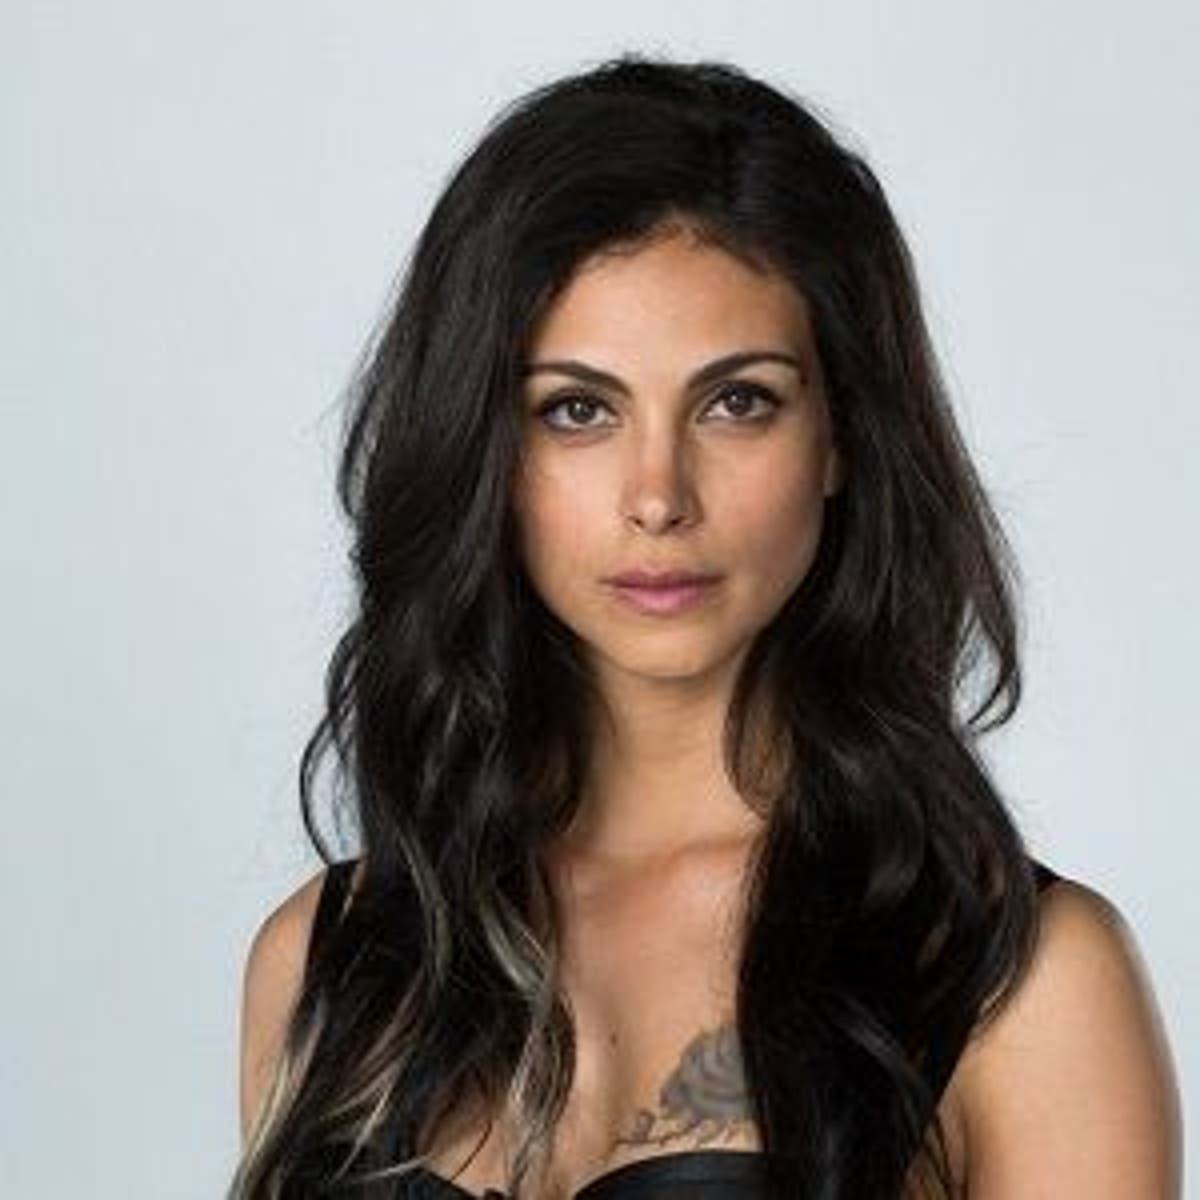 Morena Baccarin Wiki: 5 Facts To Know About The 'Firefly'